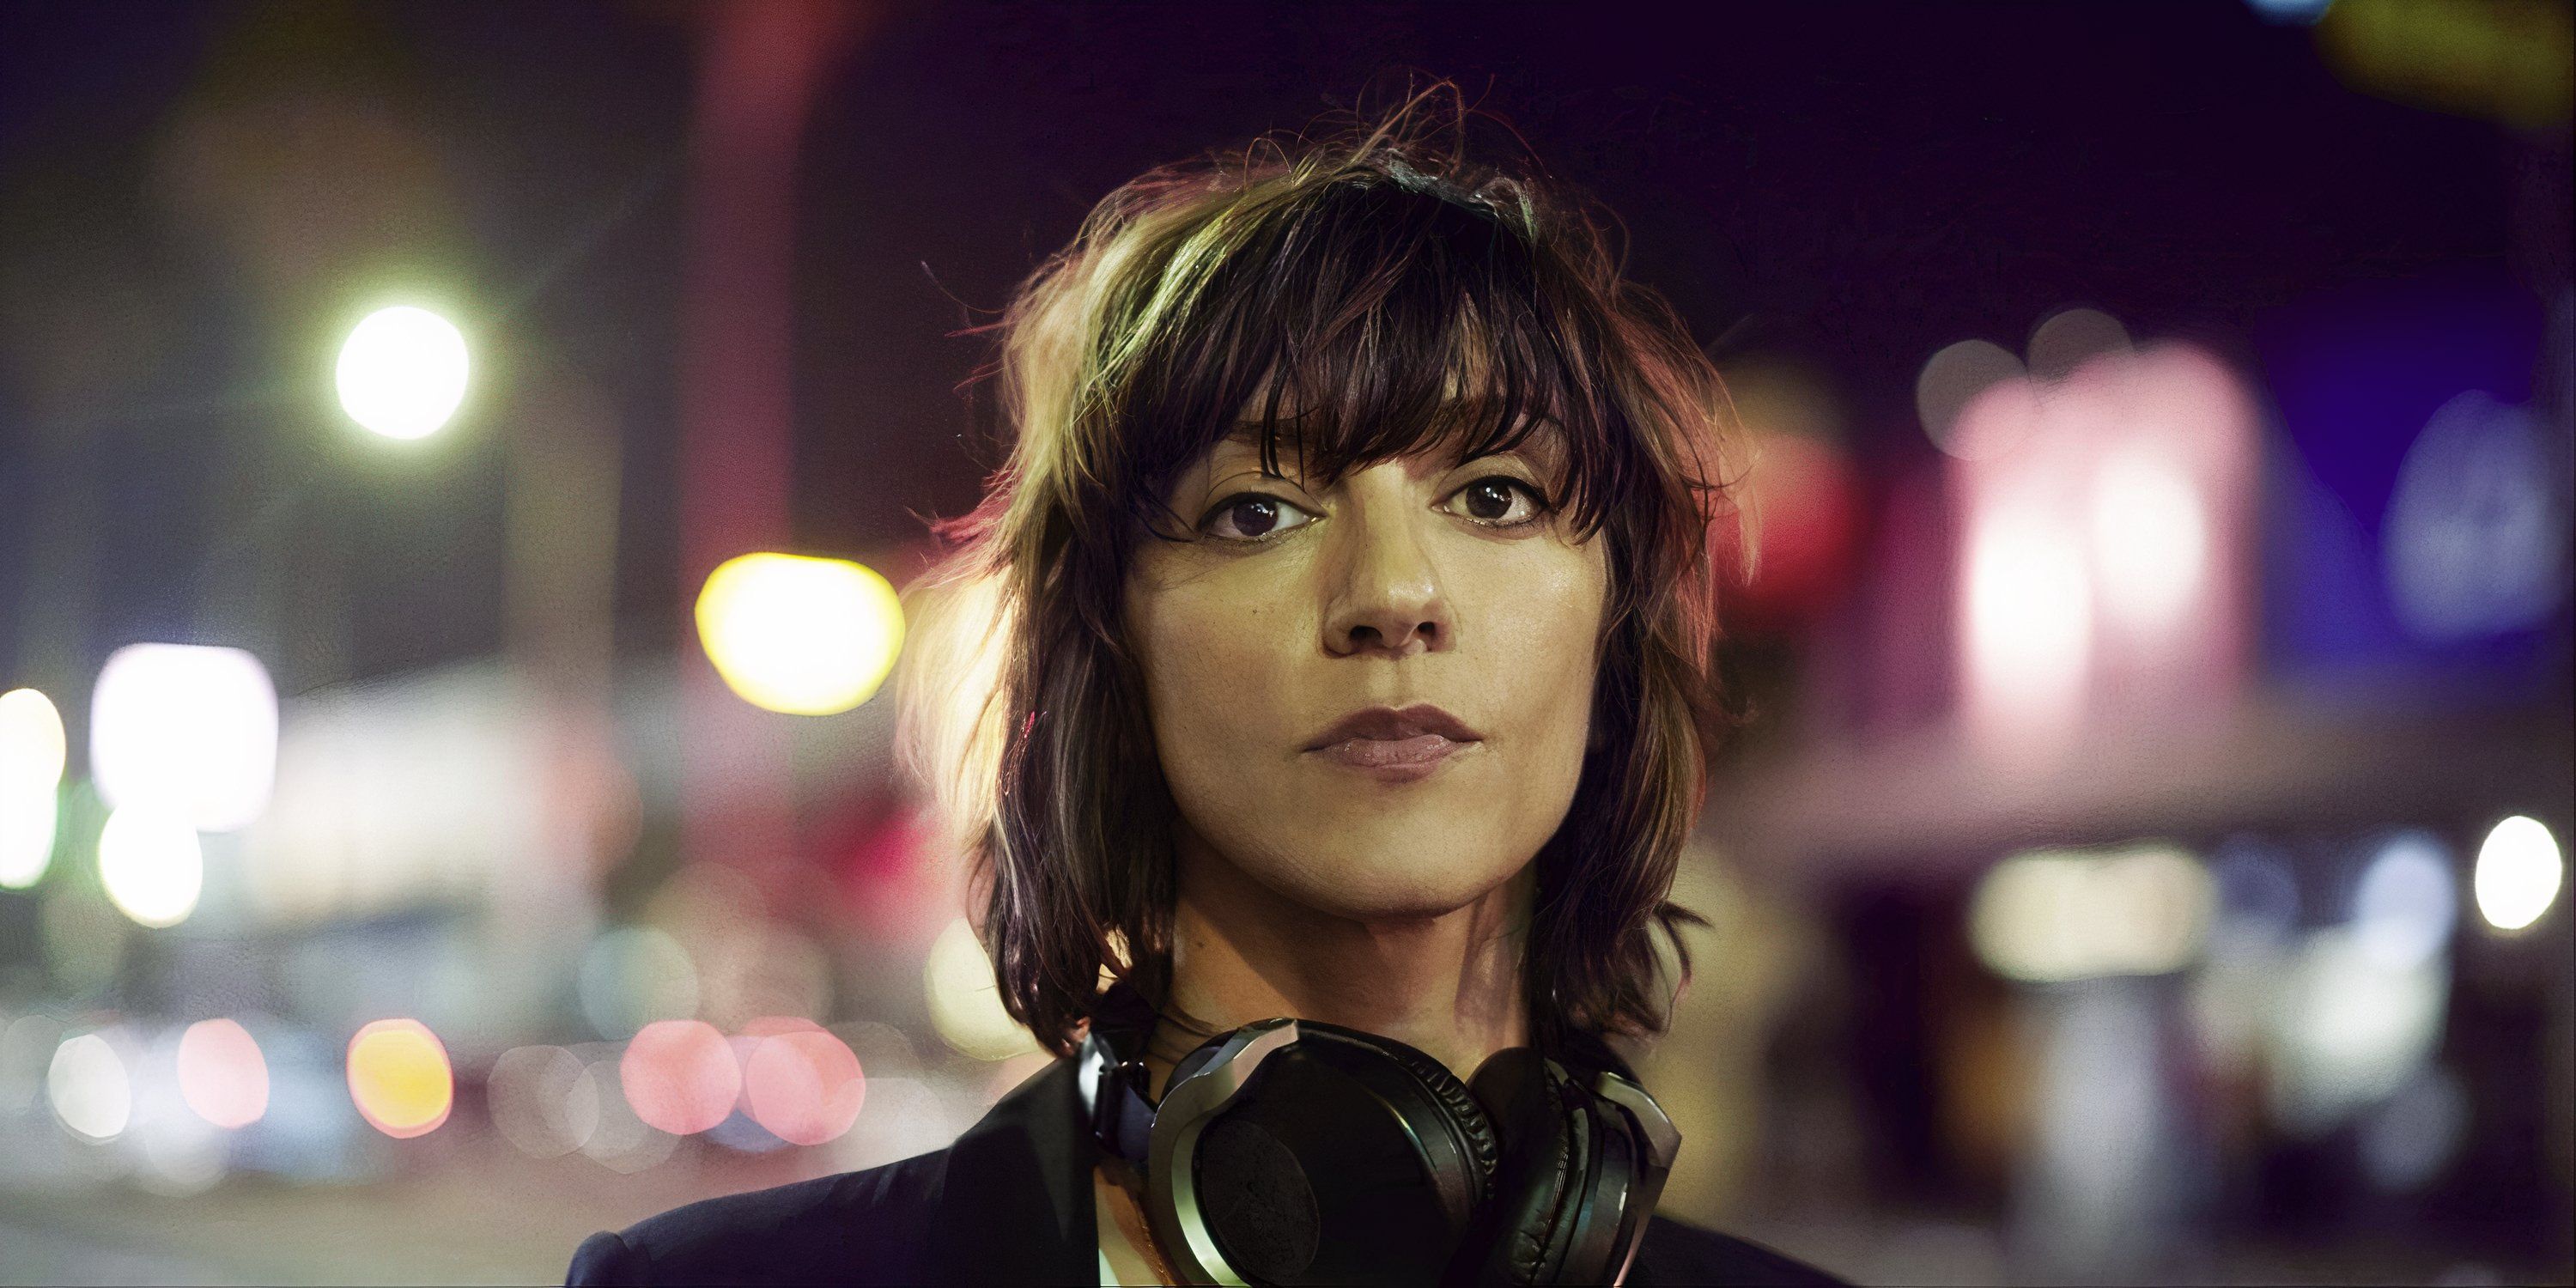 Ana Lily Amirpour standing in the street with headphones around her neck.